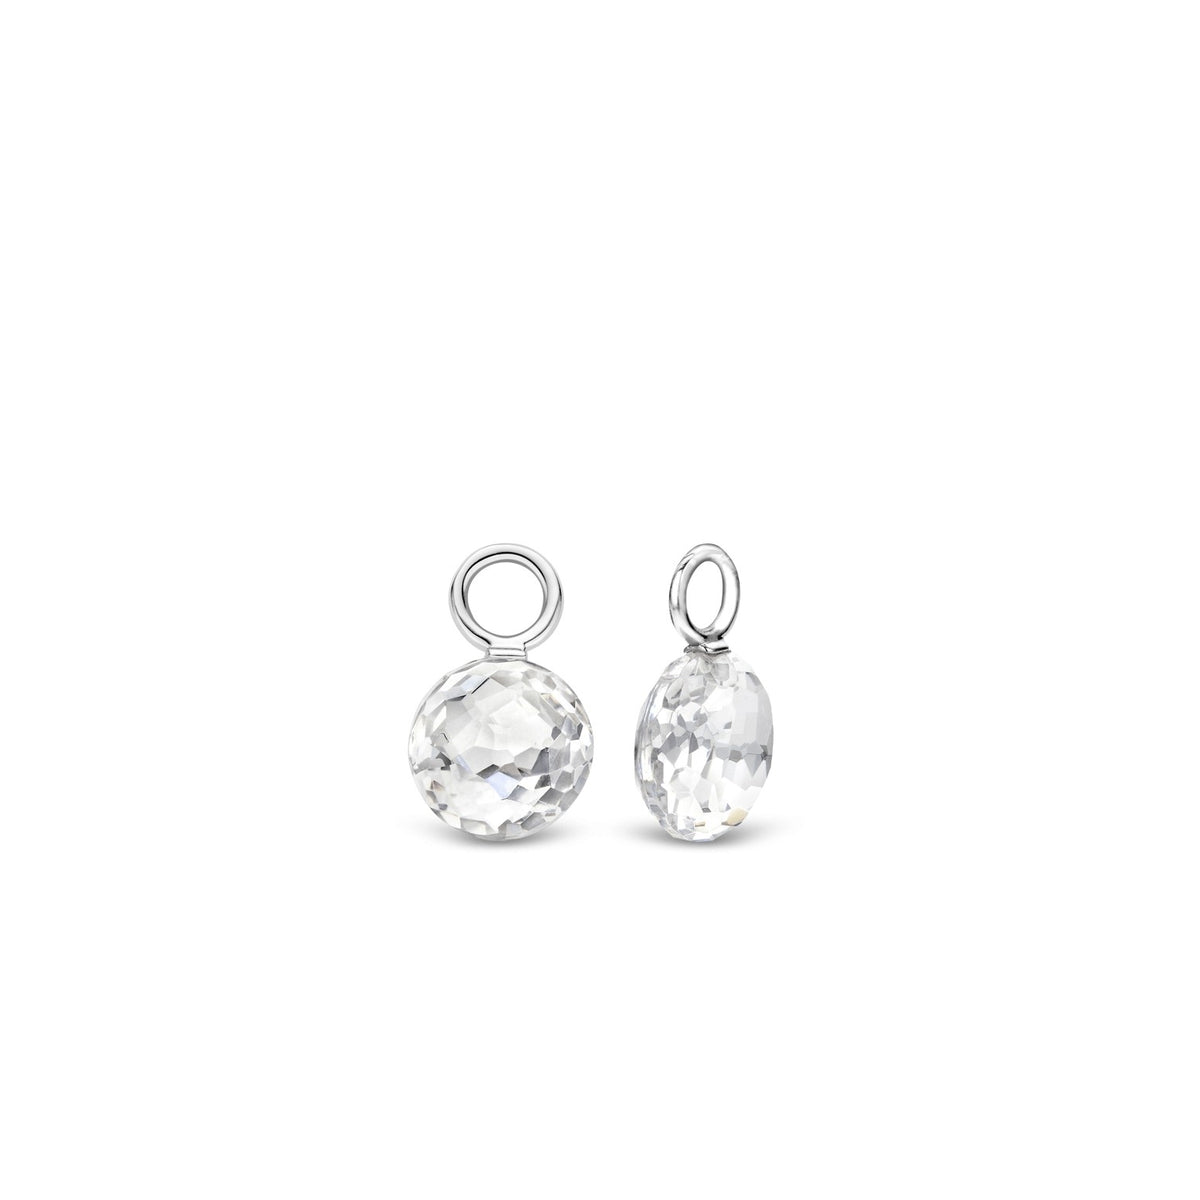 TI SENTO Sterling Silver Ear Charms with Round Clear Faceted Stone